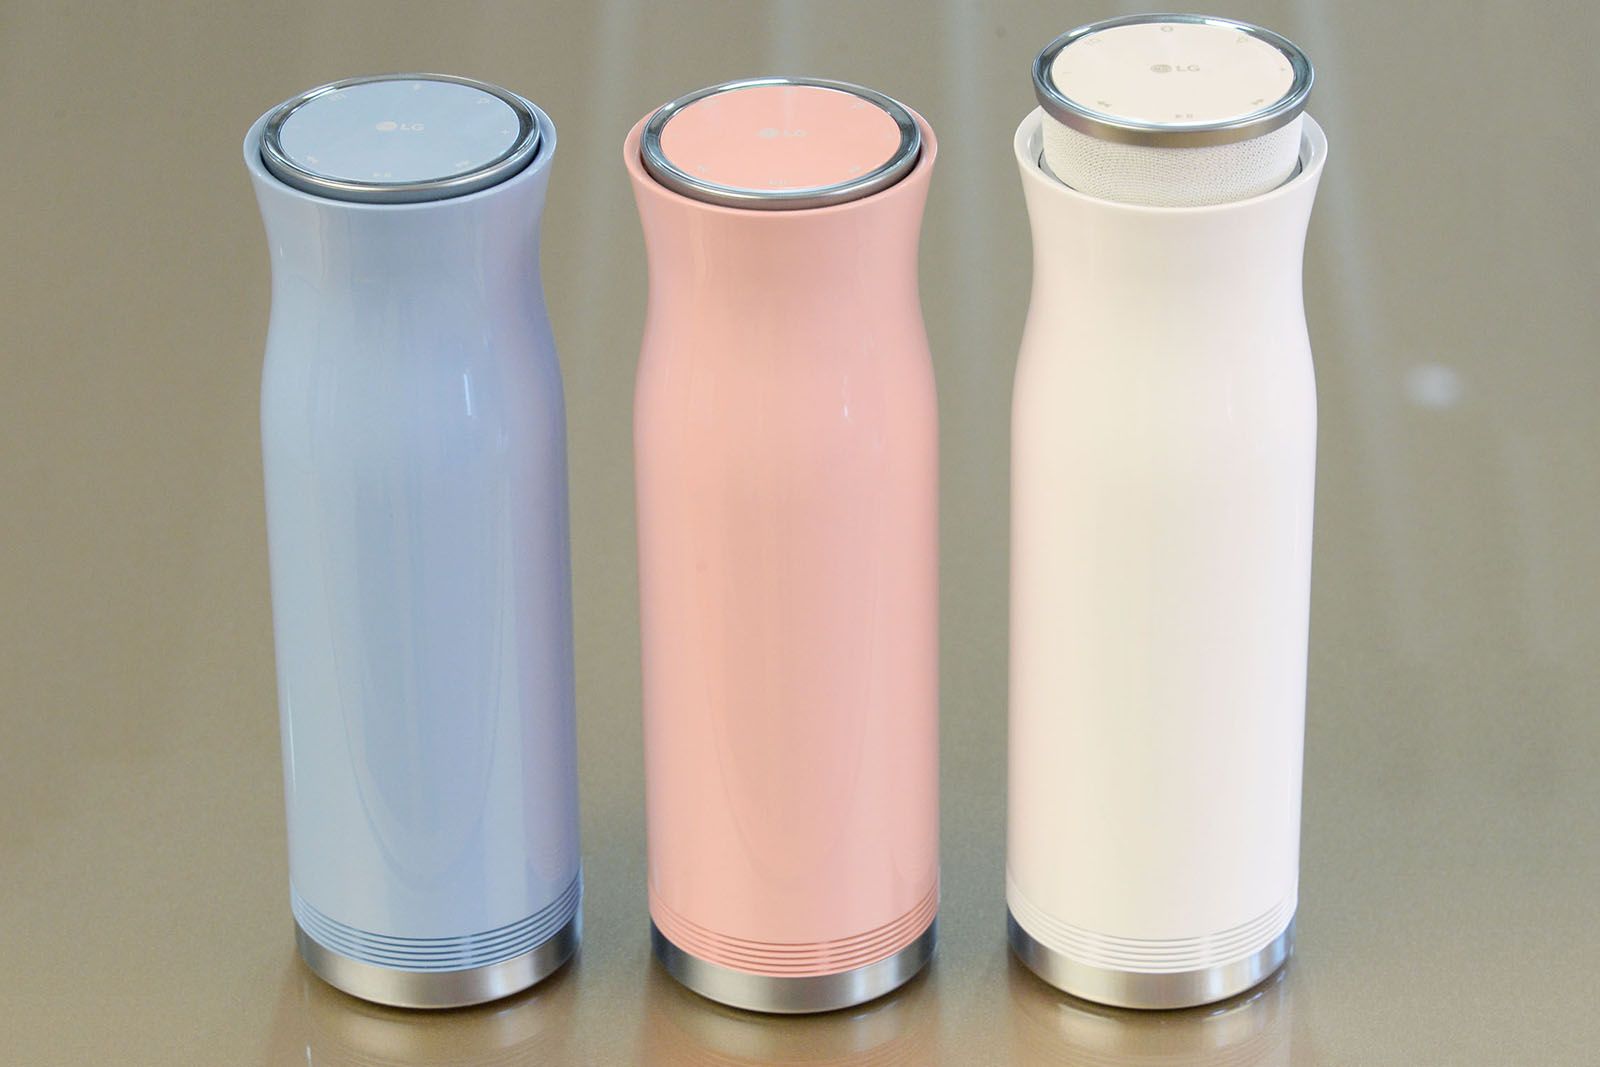 no these aren’t milkshakes they’re lg’s new bluetooth speakers image 1